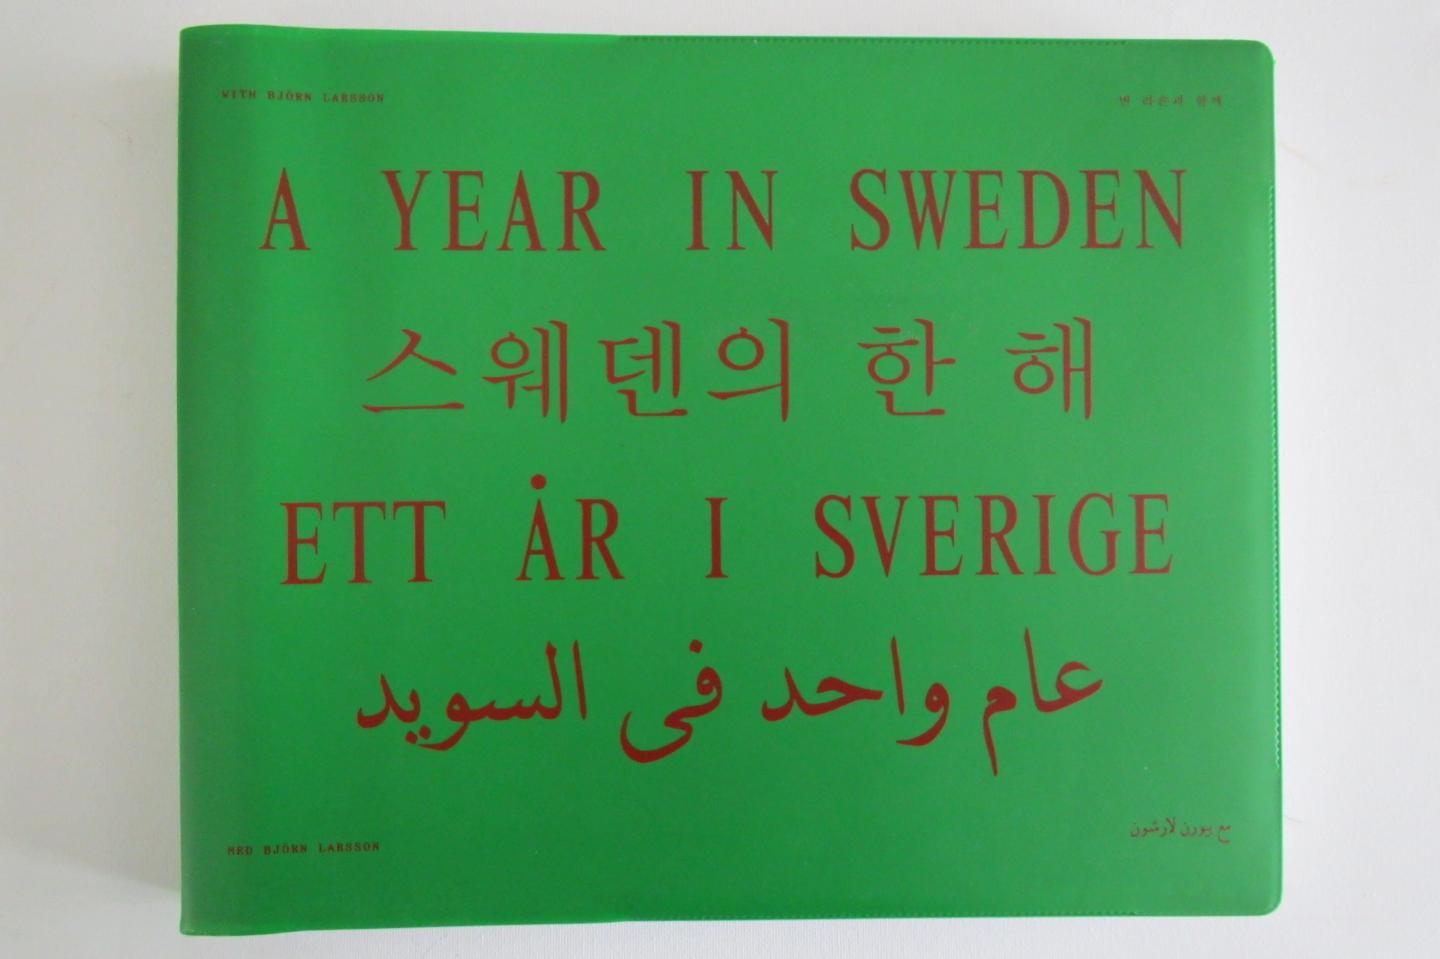 Bjorn Larsson - A year in Sweden (inclusief poster)